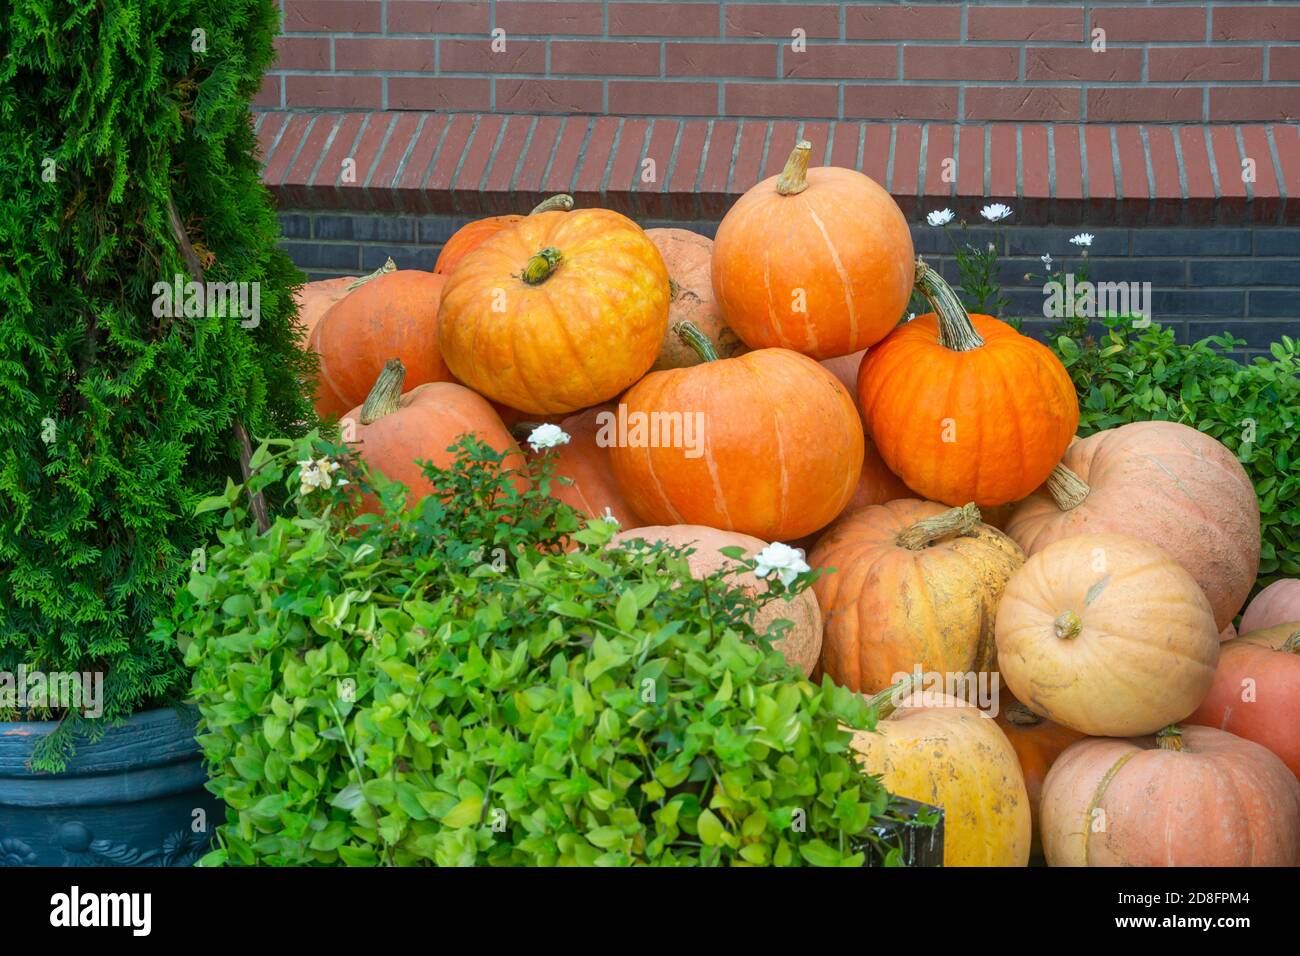 Lots of ripe yellow pumpkins in heap. Autumn decor rustic style. Stock Photo